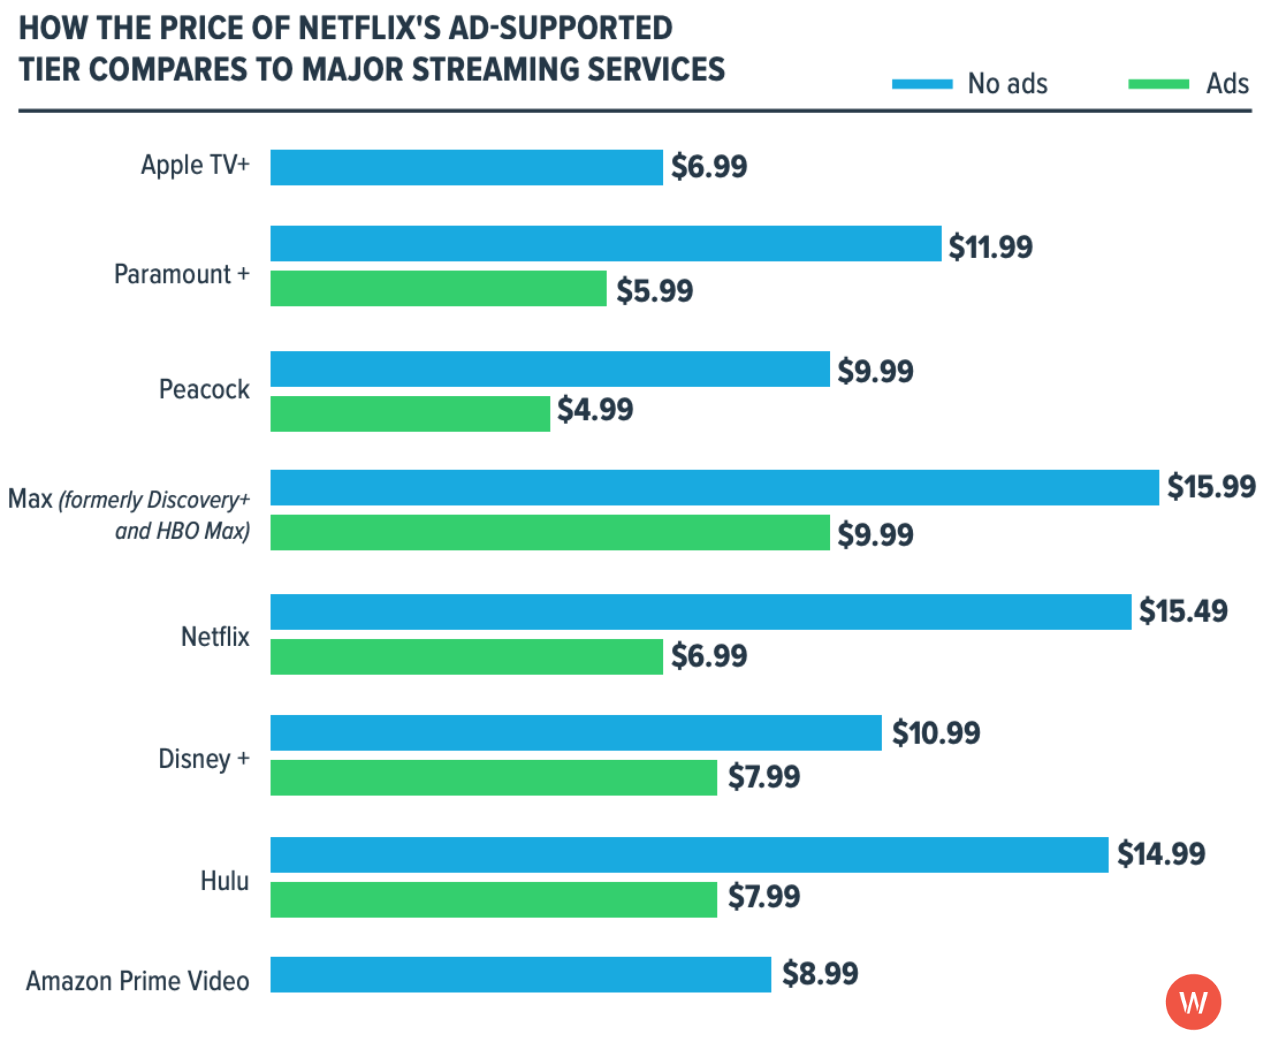 AVOD and VOD streaming services pricing breakdown